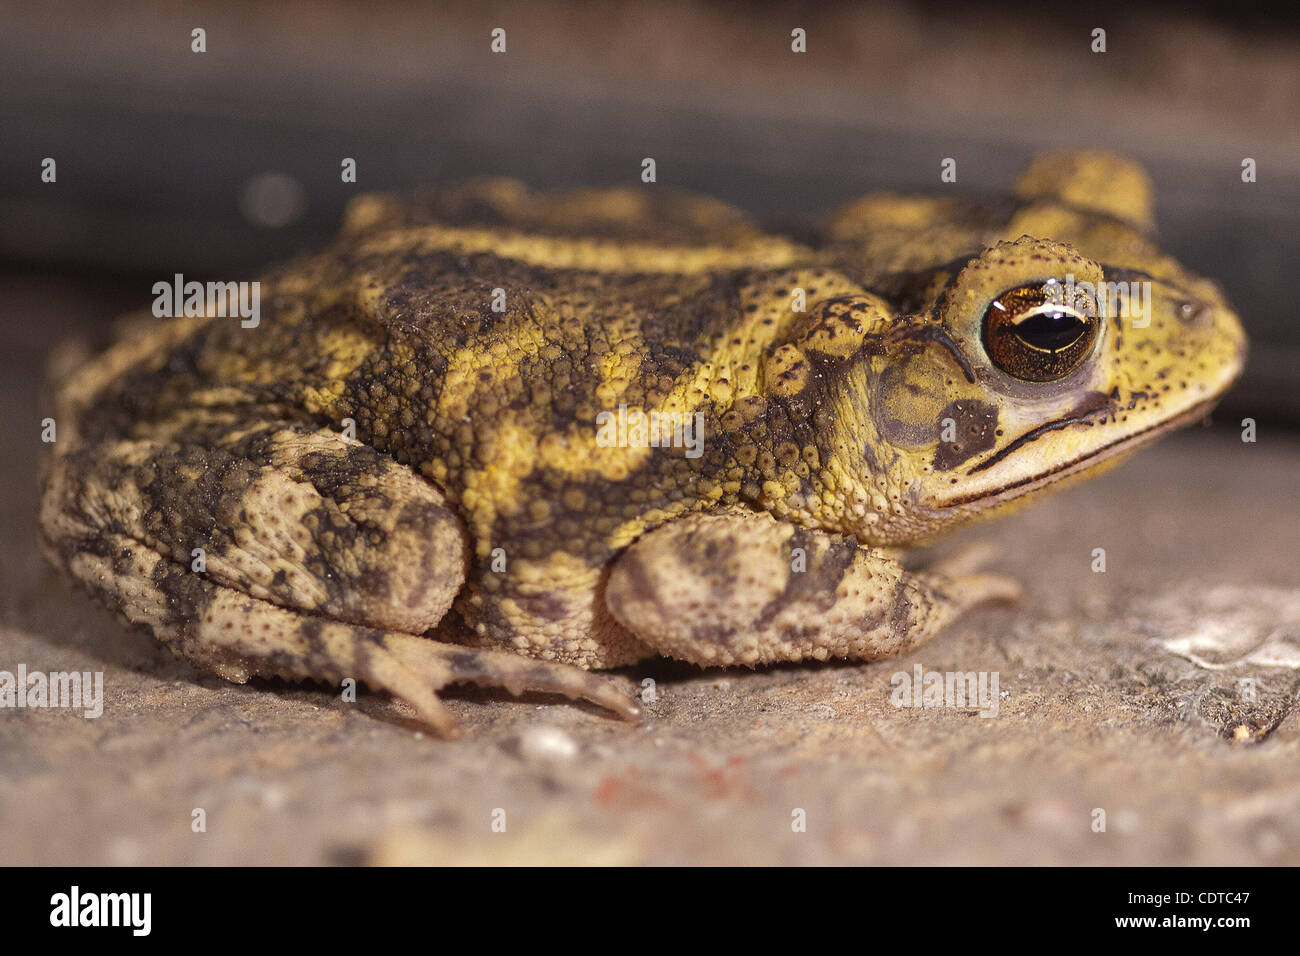 June 1, 2011 - Houston, Texas, U.S. - Woodhouse Toad sits by the edge of a garage door at night. (Credit Image: © Juan DeLeon/Southcreek Global/ZUMAPRESS.com) Stock Photo